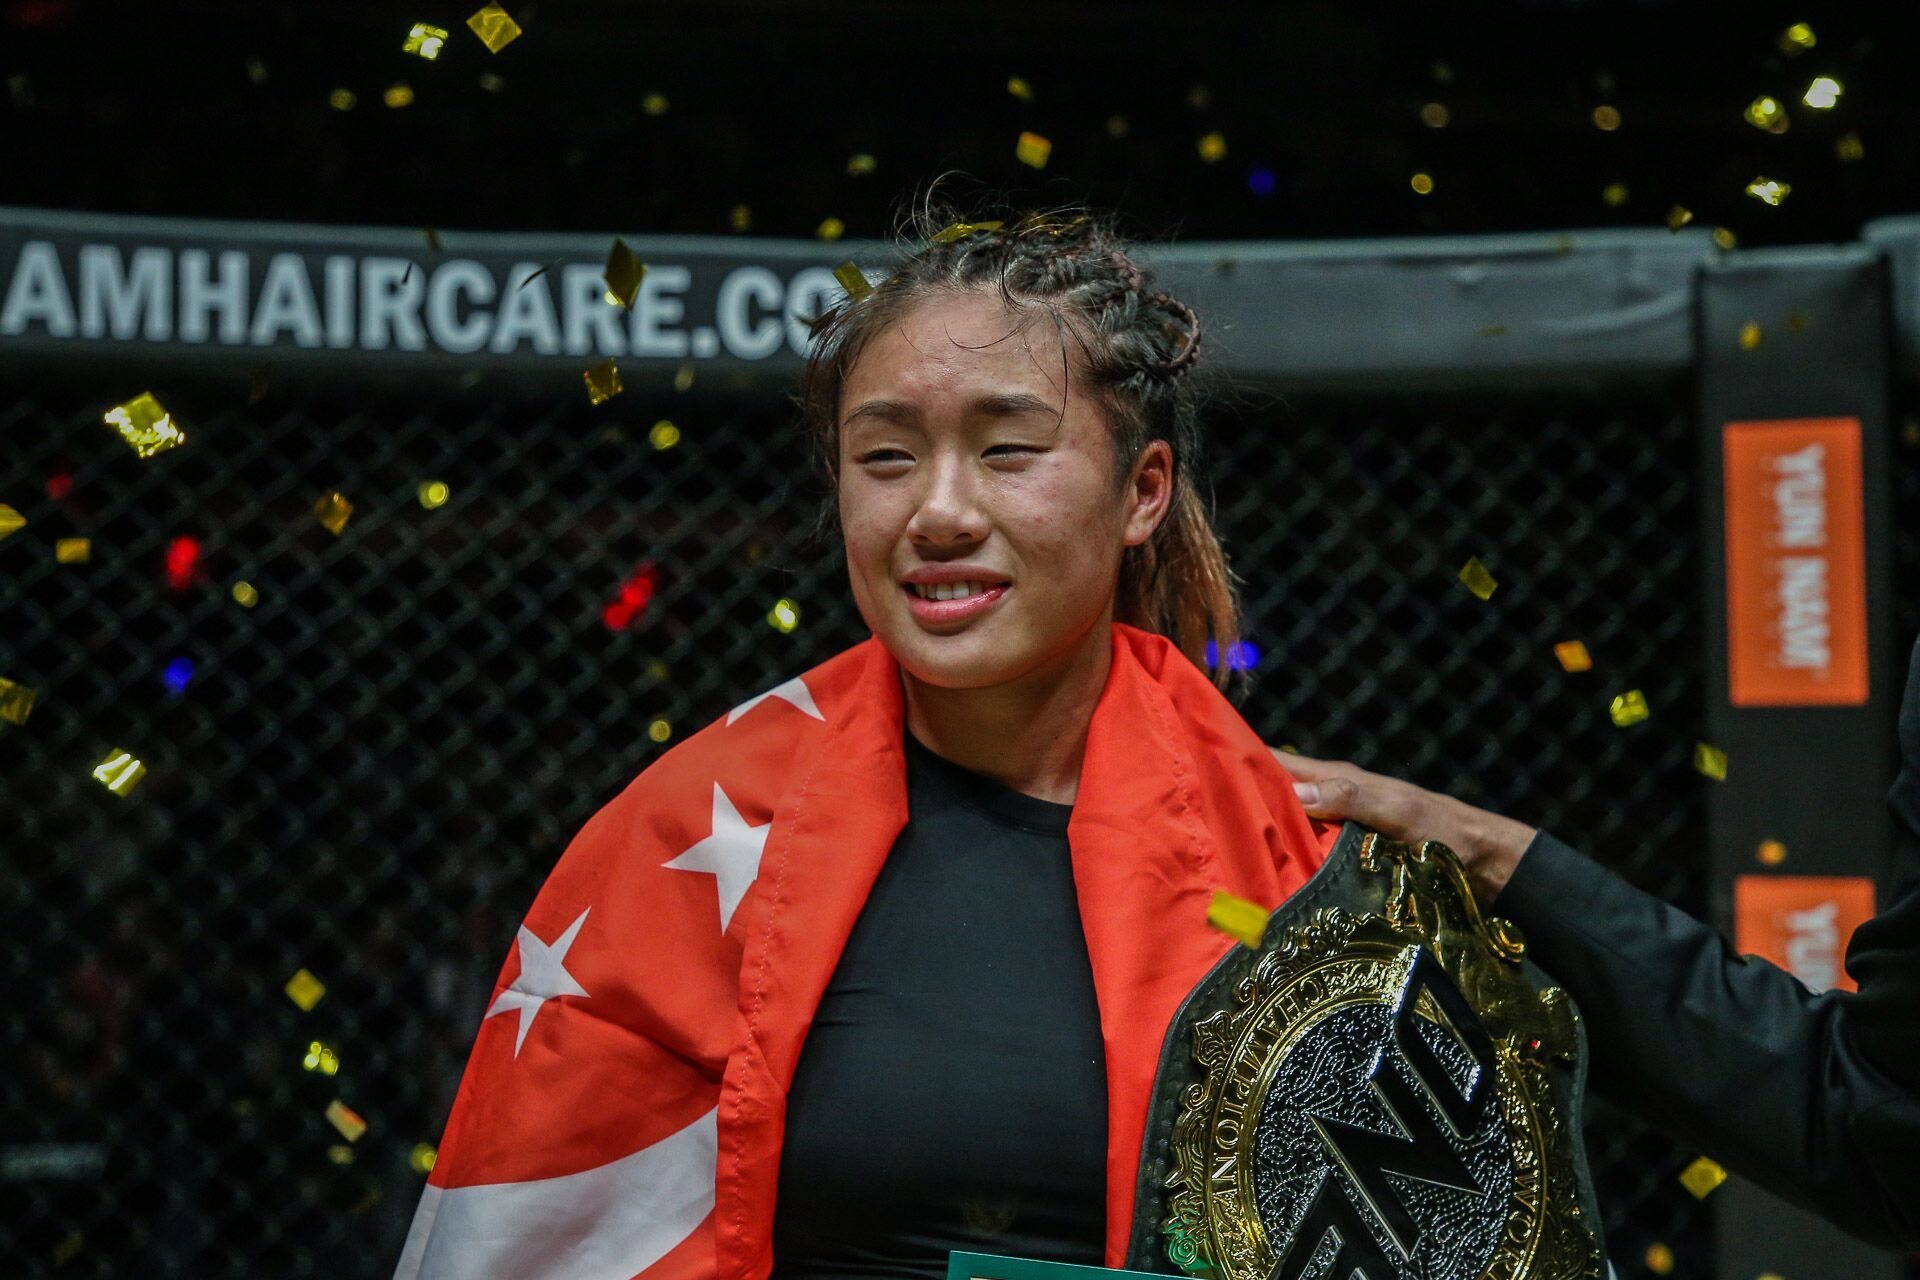 Angela Lee Doubles Down On Decision Not To Vacate Title In Heated Media